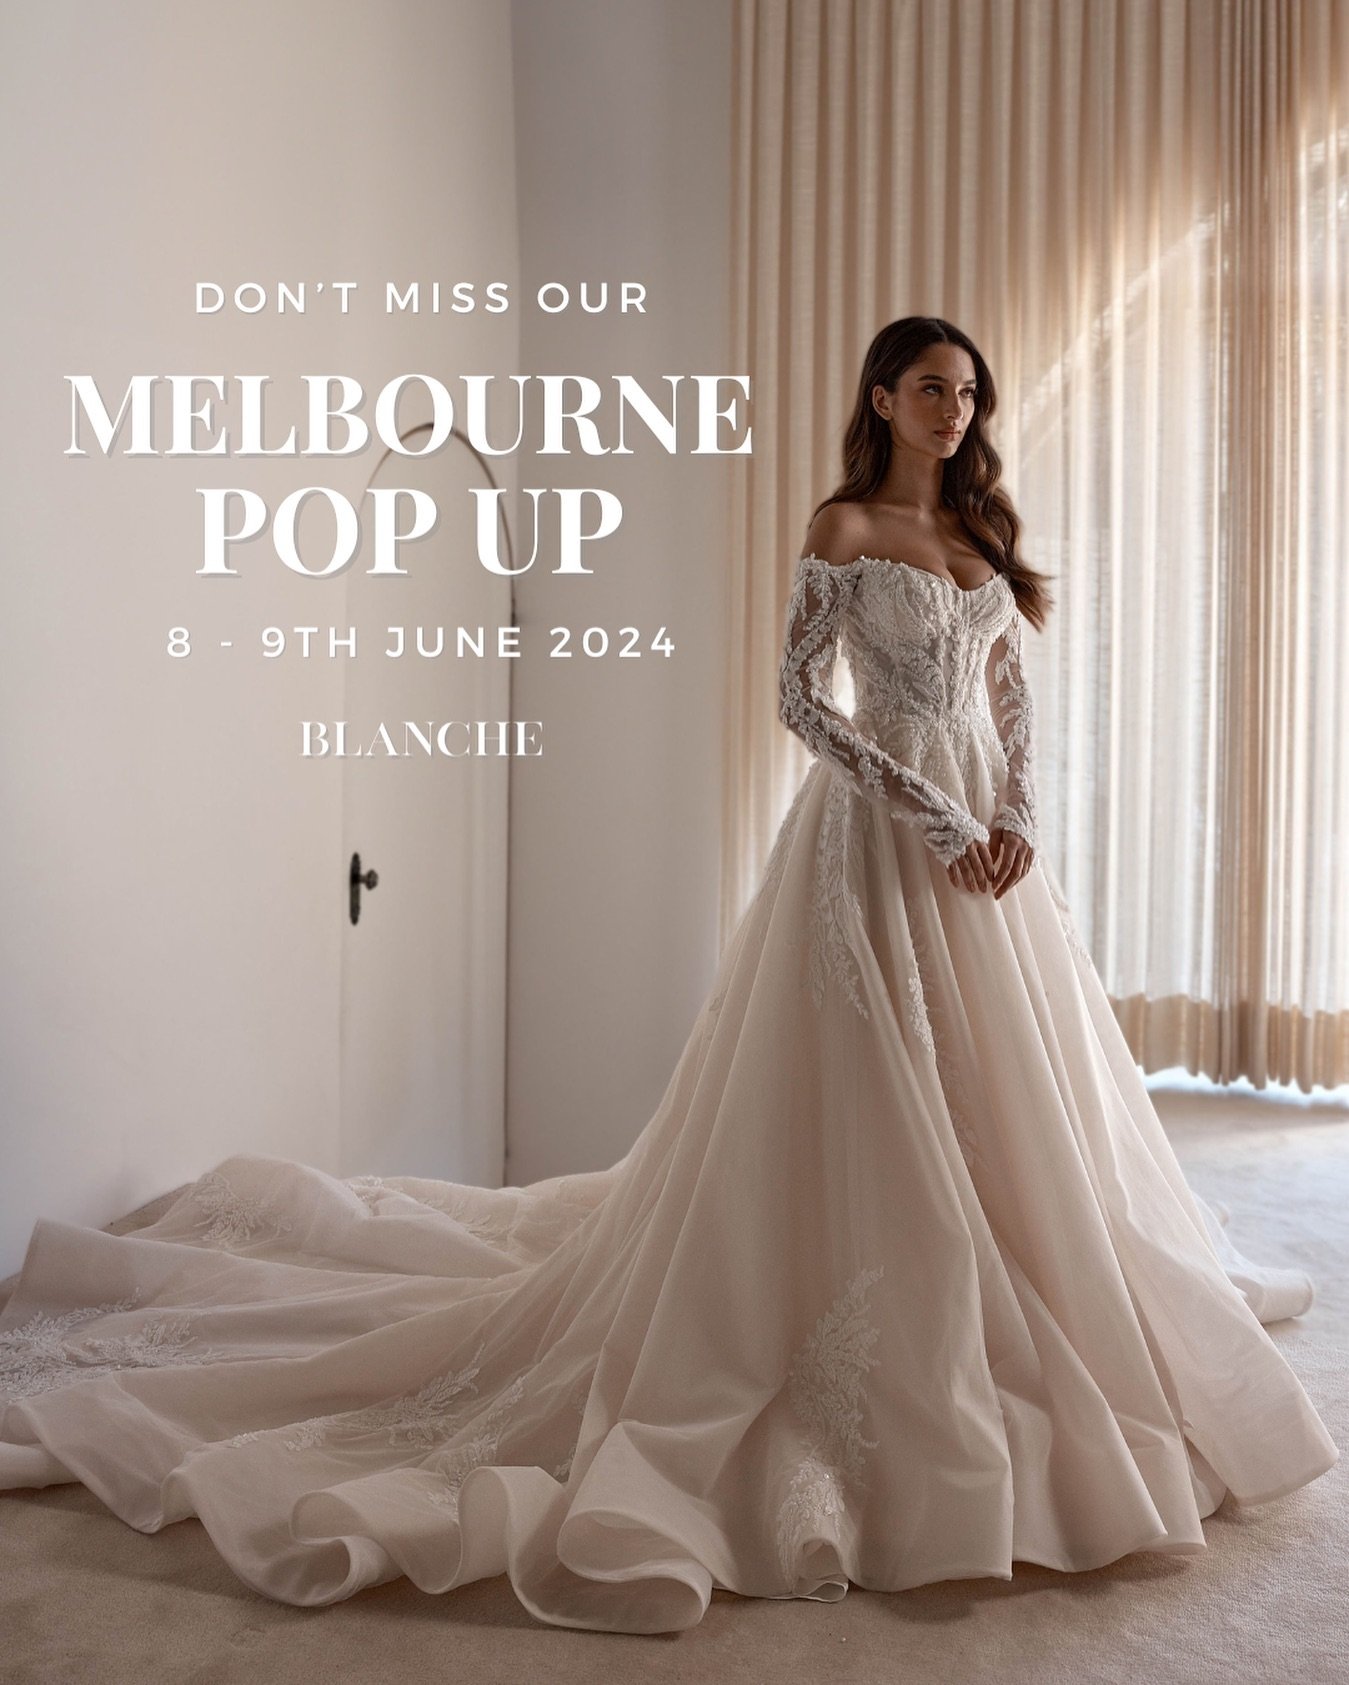 Calling all Melbourne brides! ✨

Get ready to say &ldquo;YES&rdquo; to your dream dress at Blanche Bridal&rsquo;s exclusive Melbourne pop-up!

For a limited time only, we&rsquo;re bringing our most beloved gowns to Shadow Play by Peppers, Melbourne f